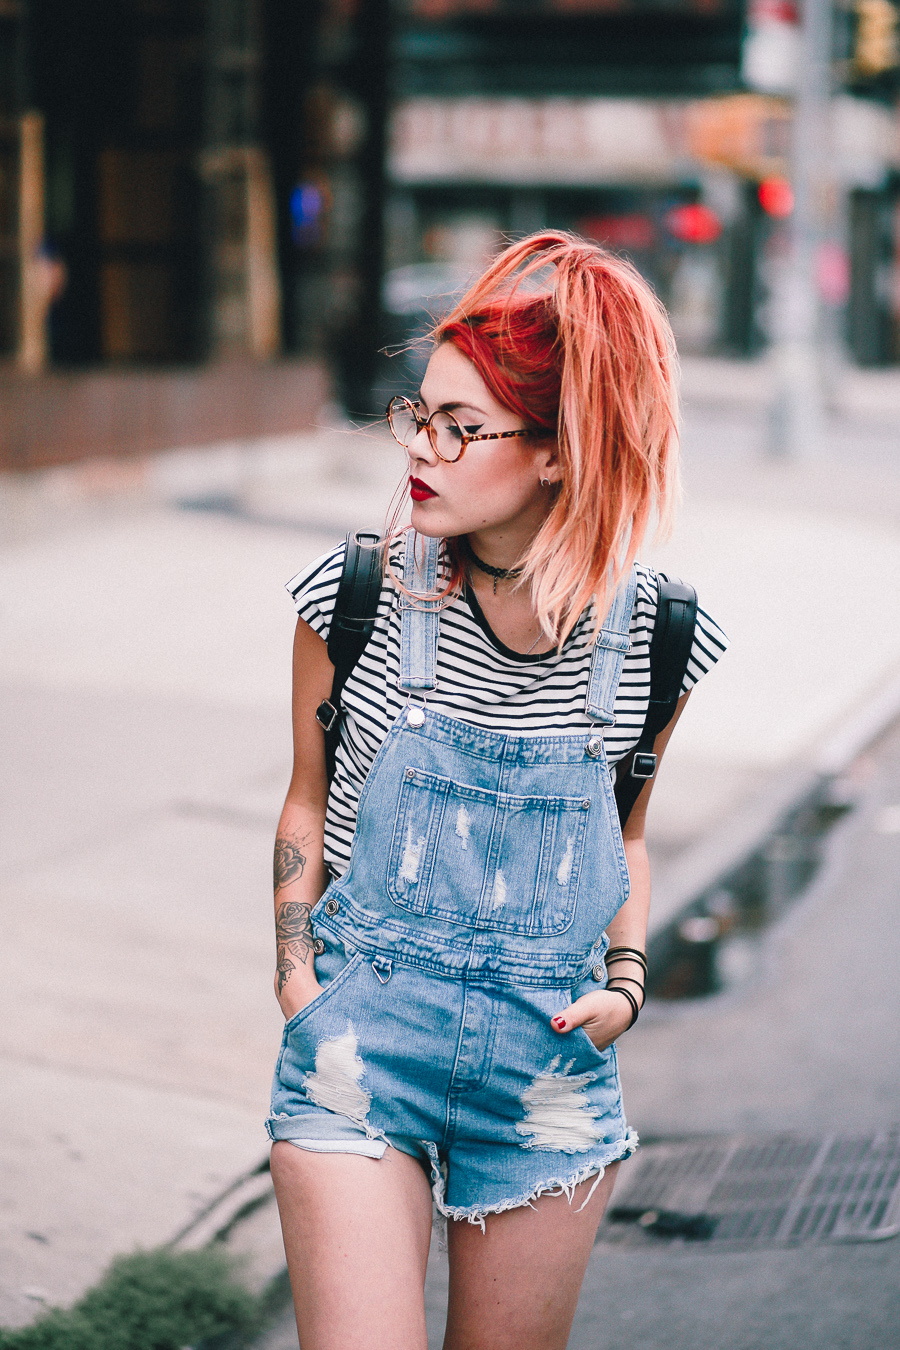 Le Happy wearing red Dr Martens Newton and ASOS overalls